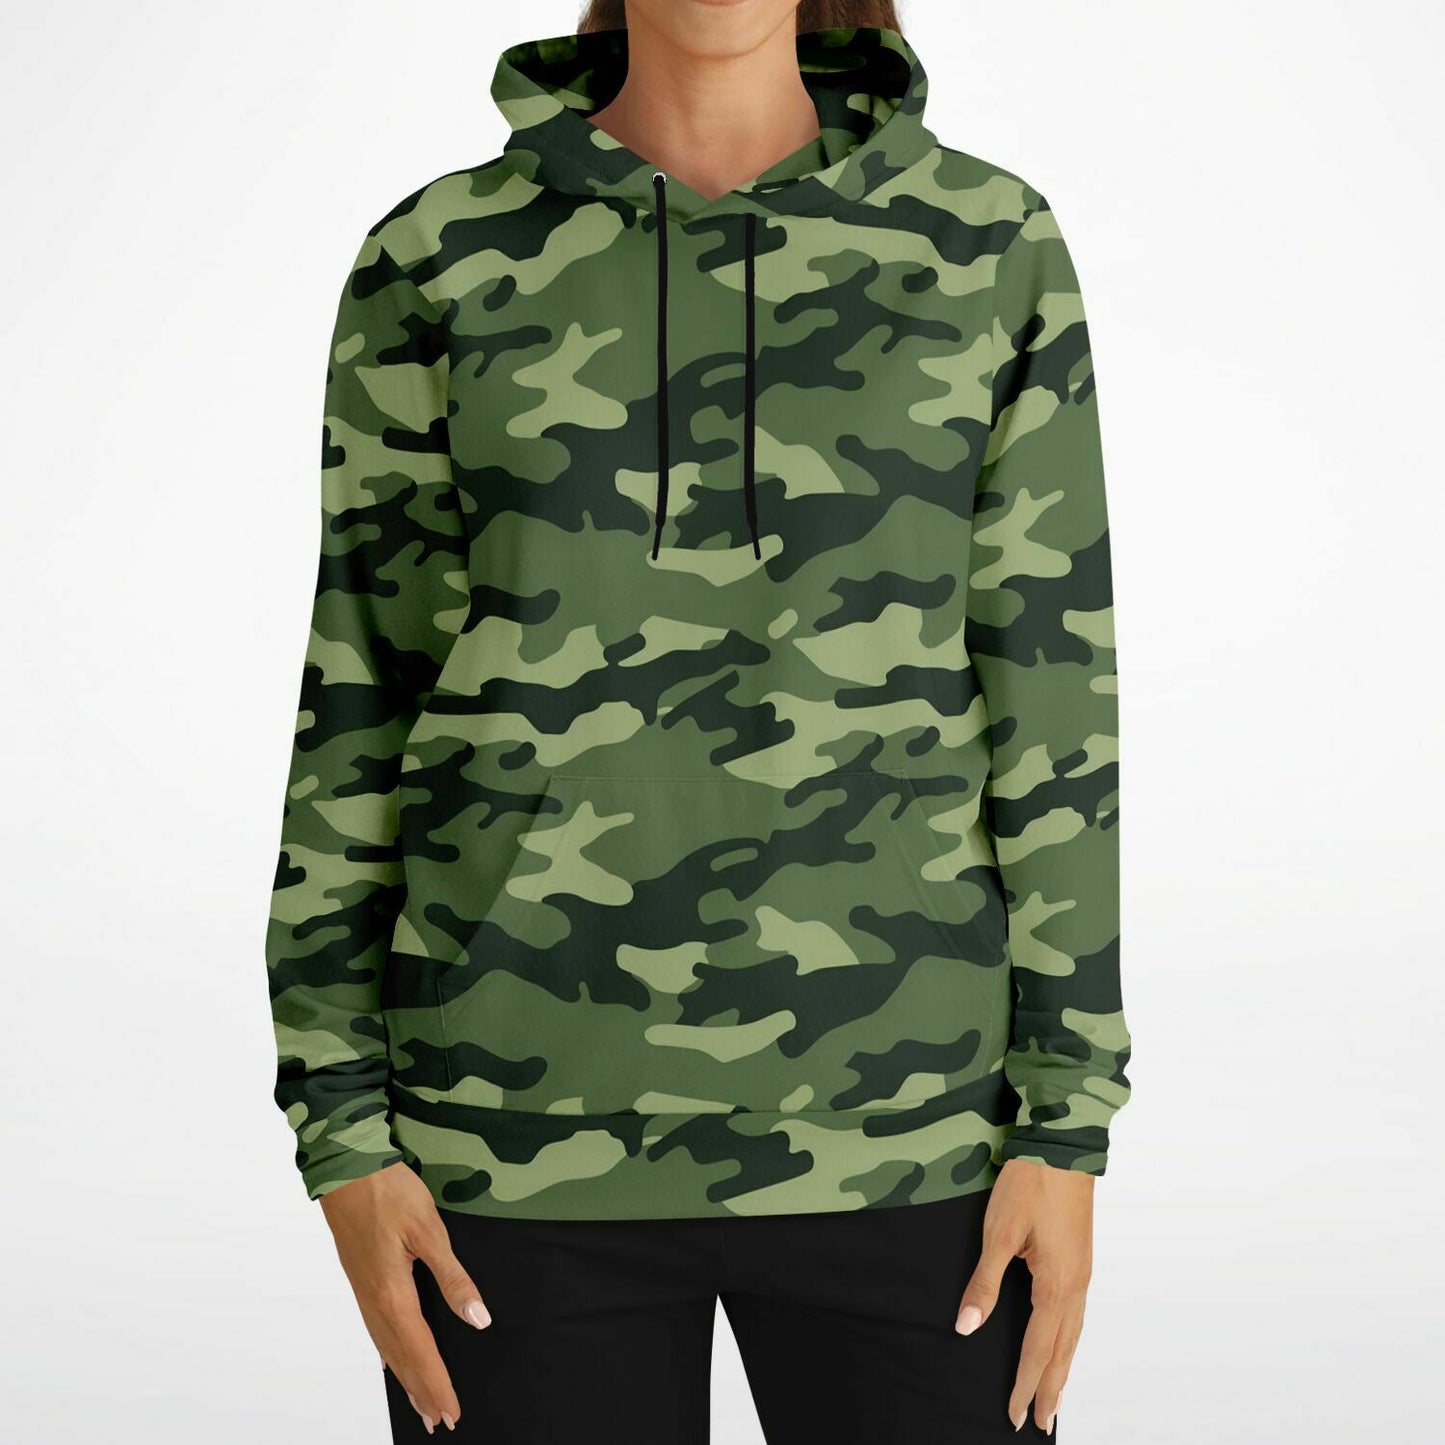 Olive Green Camo Hoodie, Camouflage Pullover Men Women Adult Aesthetic Graphic Cotton Hooded Sweatshirt with Pockets